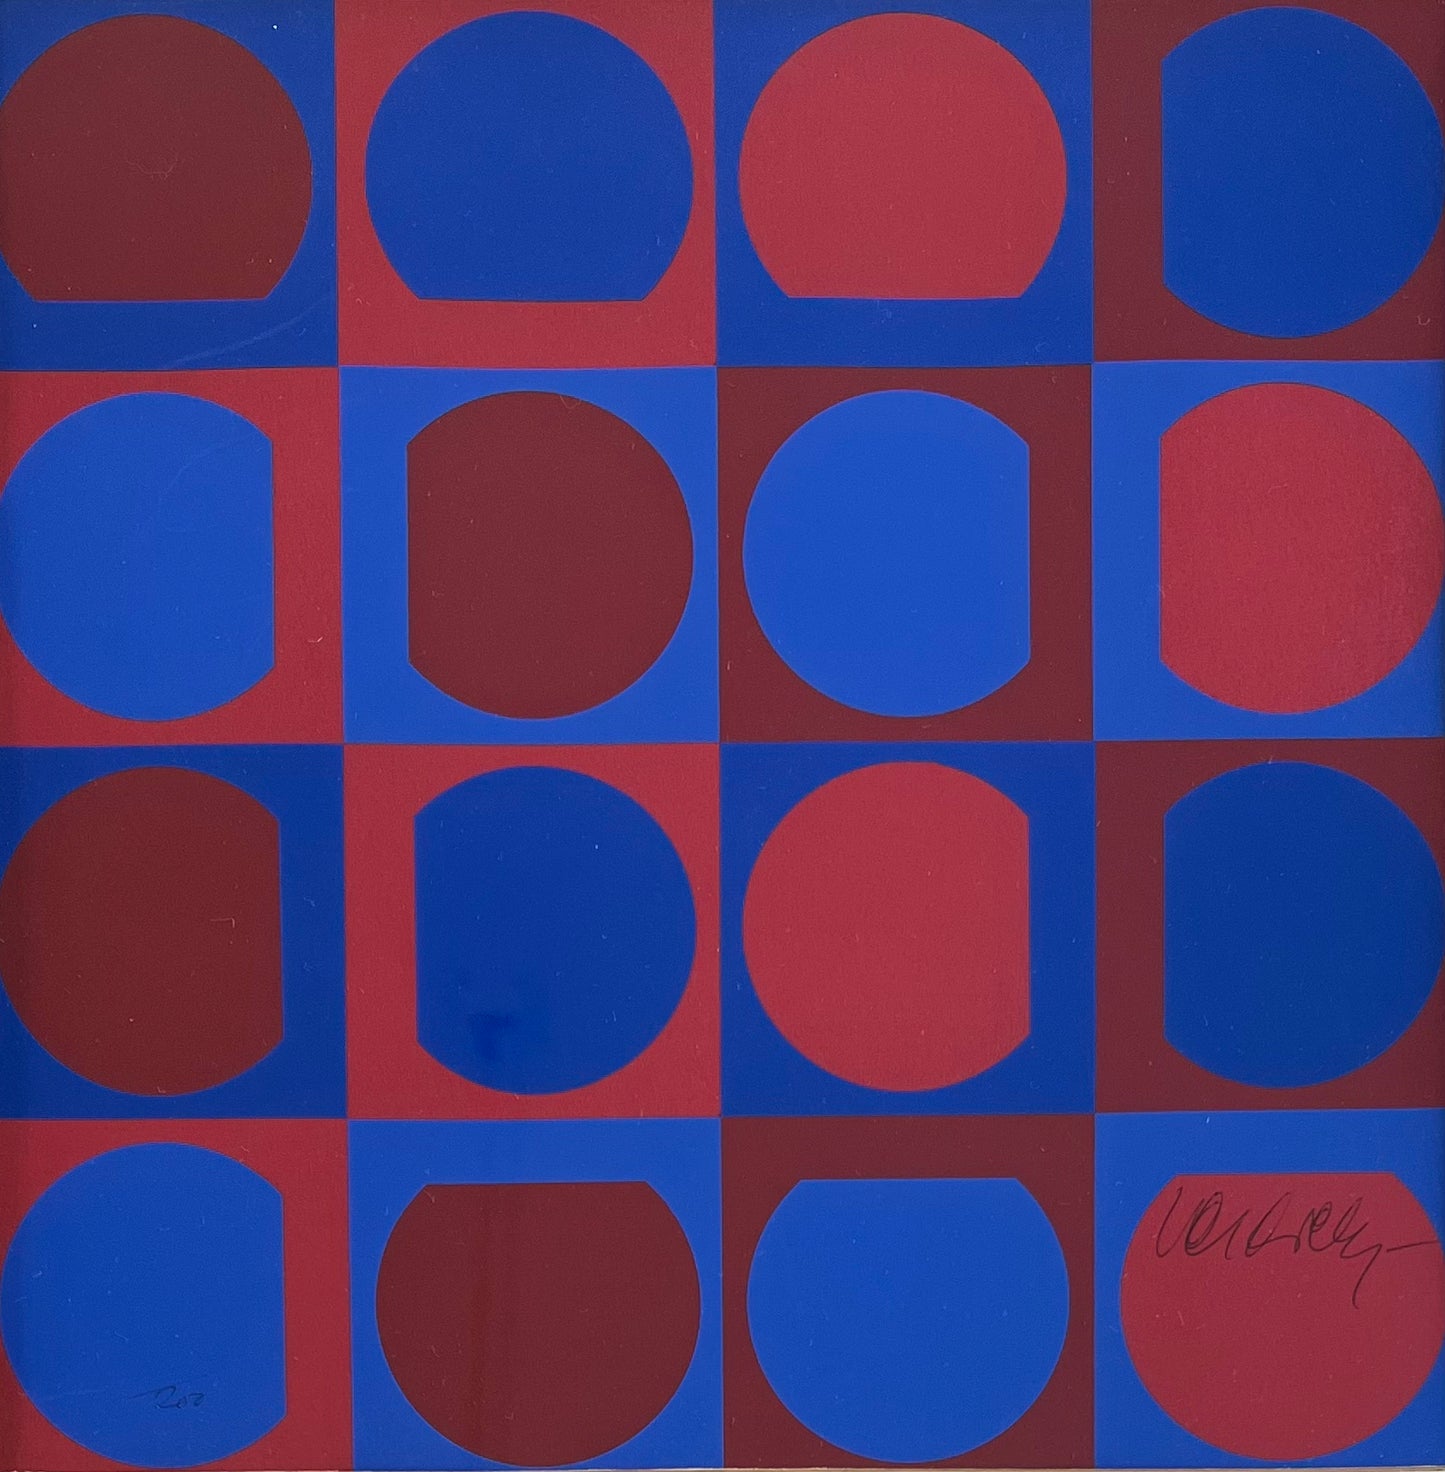 Victor Vasarely. “Folklore Planetaire”, 1964